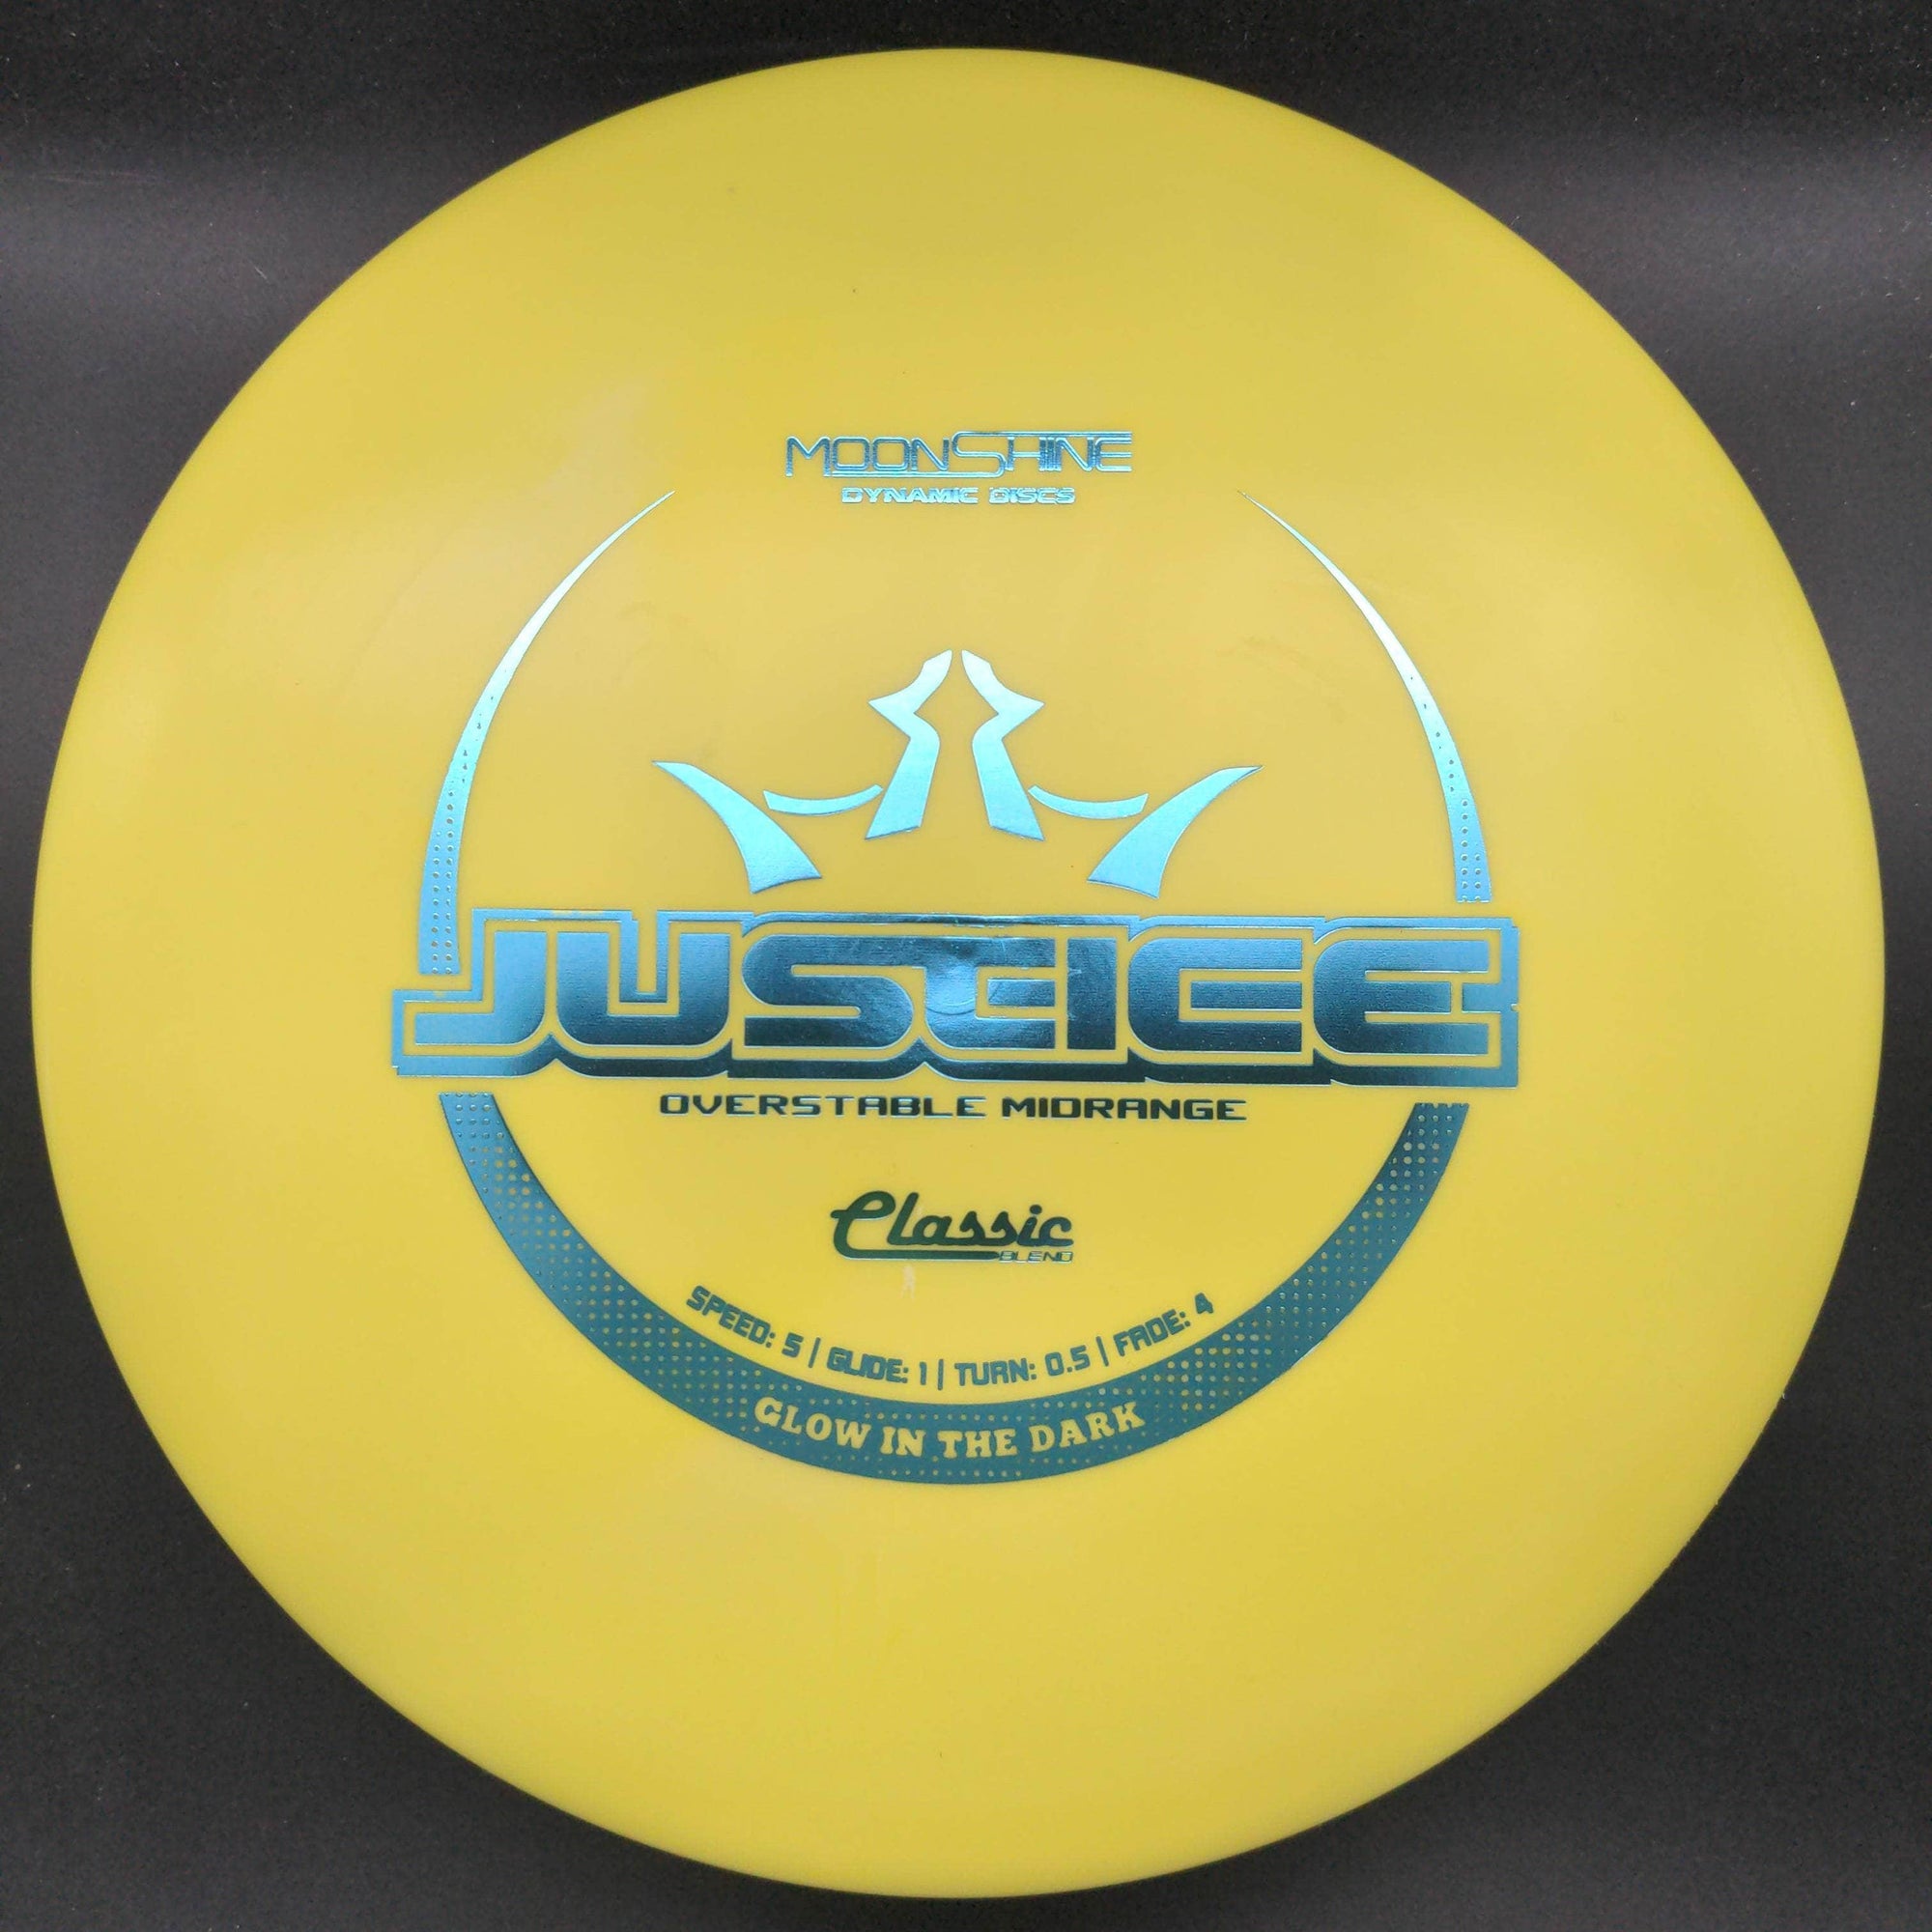 Dynamic Discs Mid Range Blue Red Stamp 176g Justice, Classic Moonshine